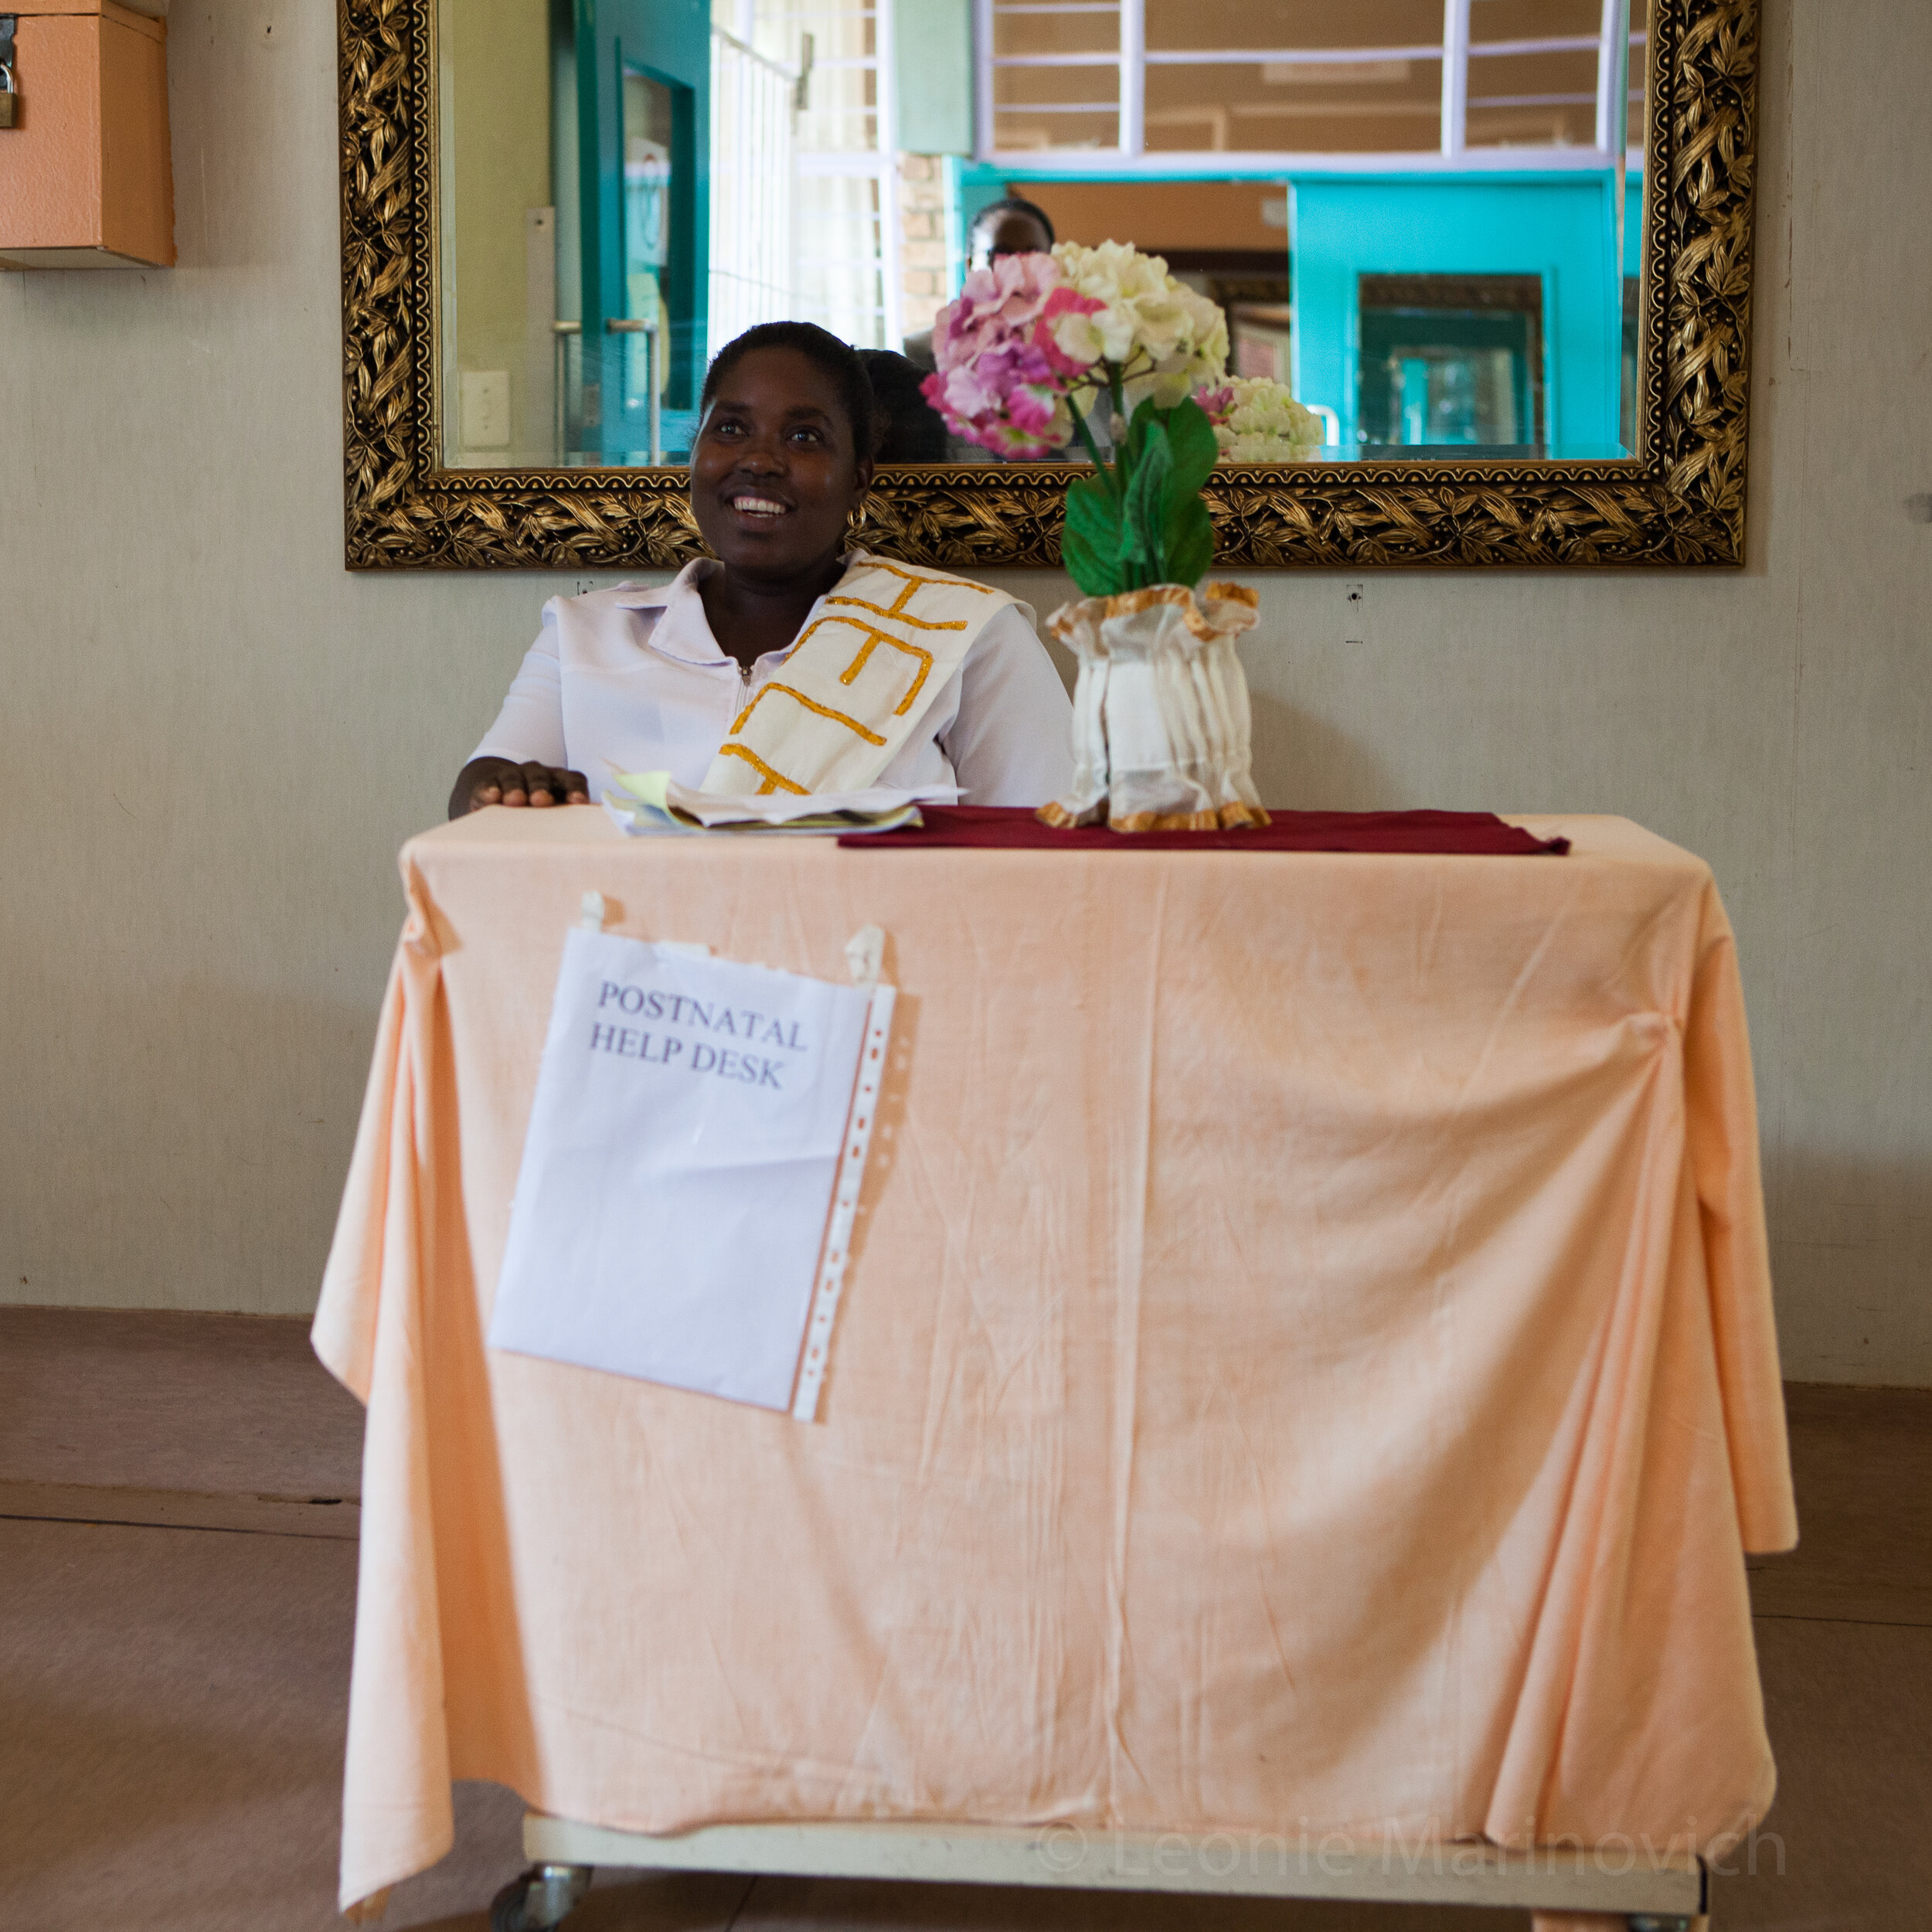  The Postnatal help desk at Malamulela district hospital in Limpopo province, South Africa. 